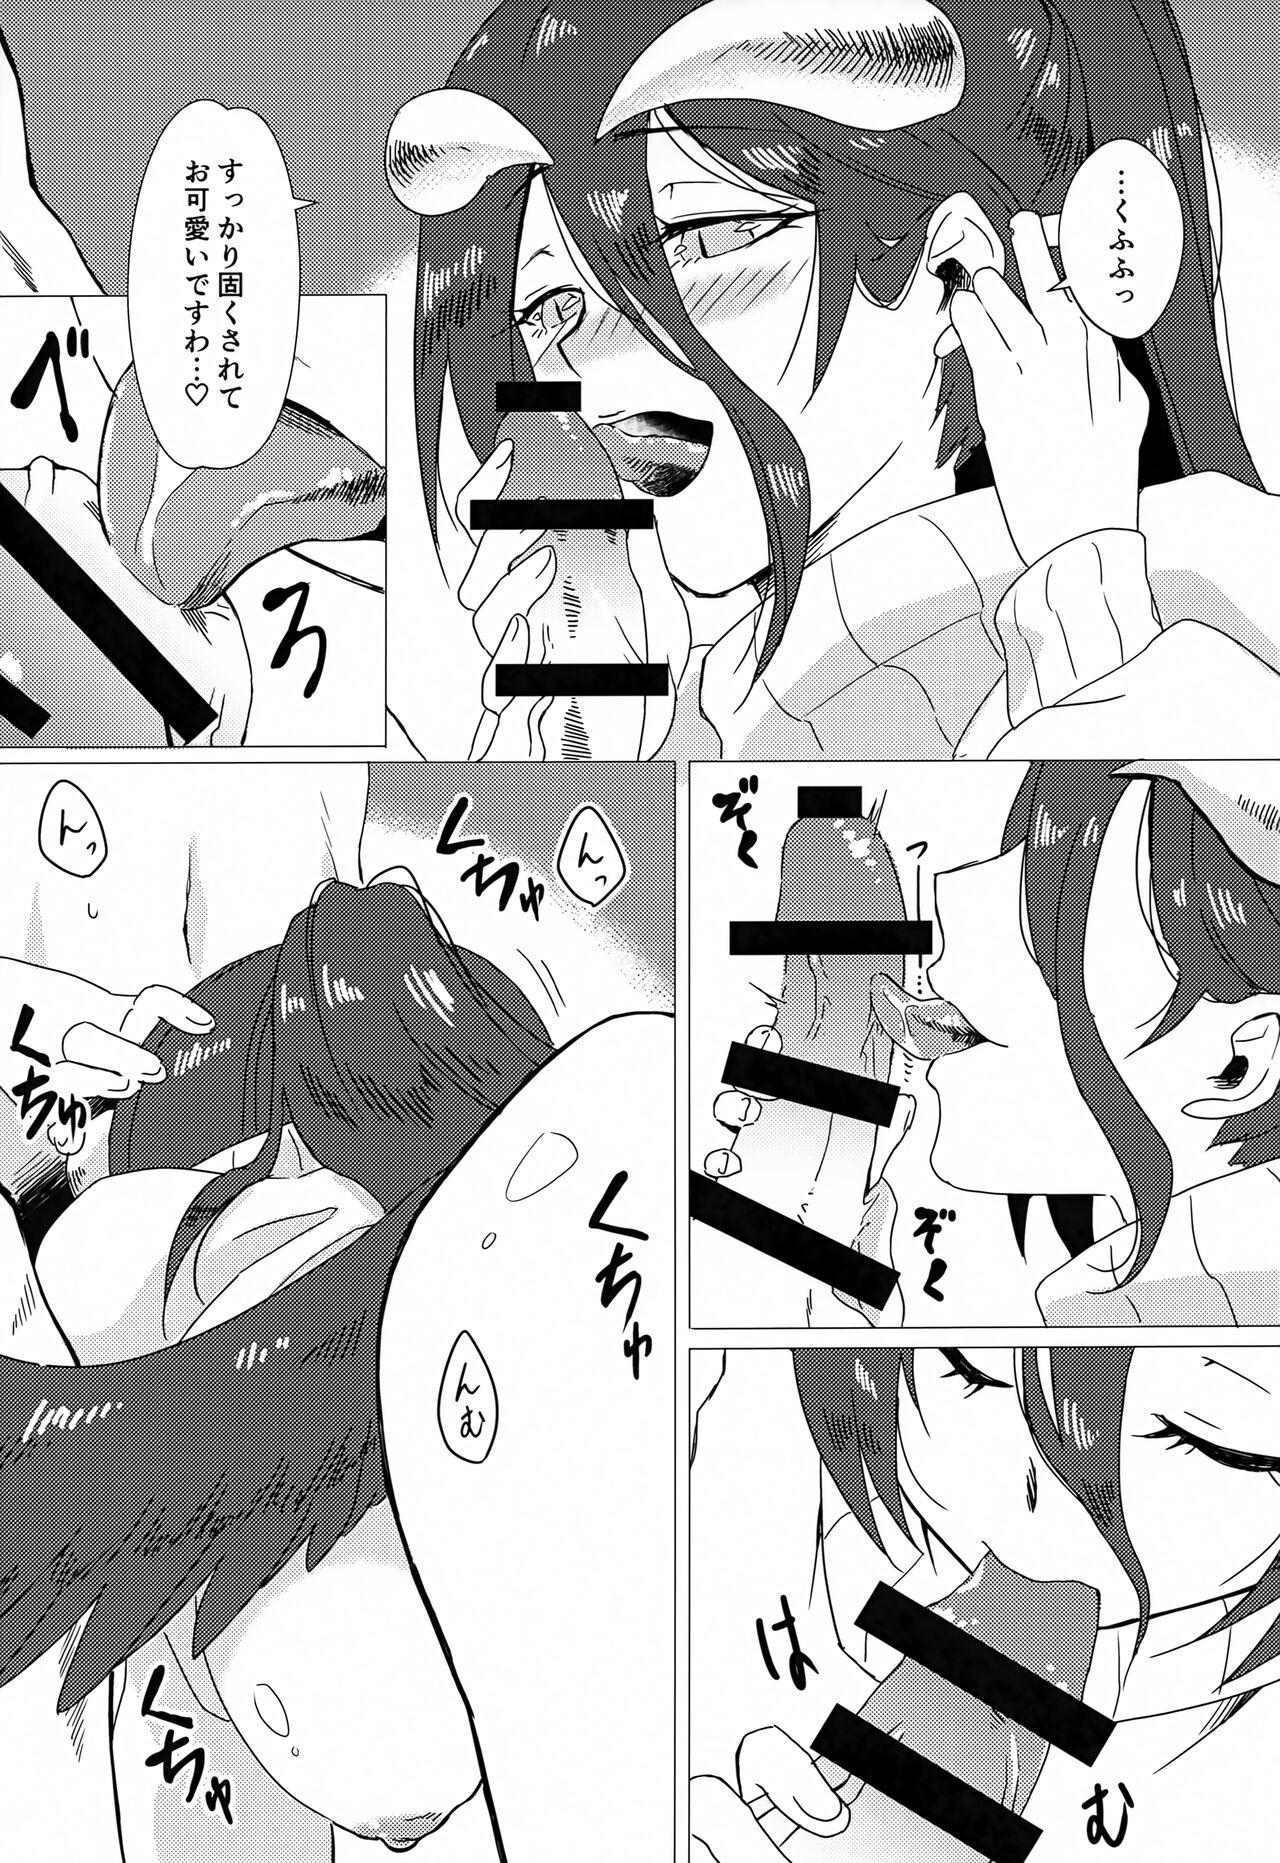 Teen Porn Albedo-san to! 2 - Overlord Story - Page 10